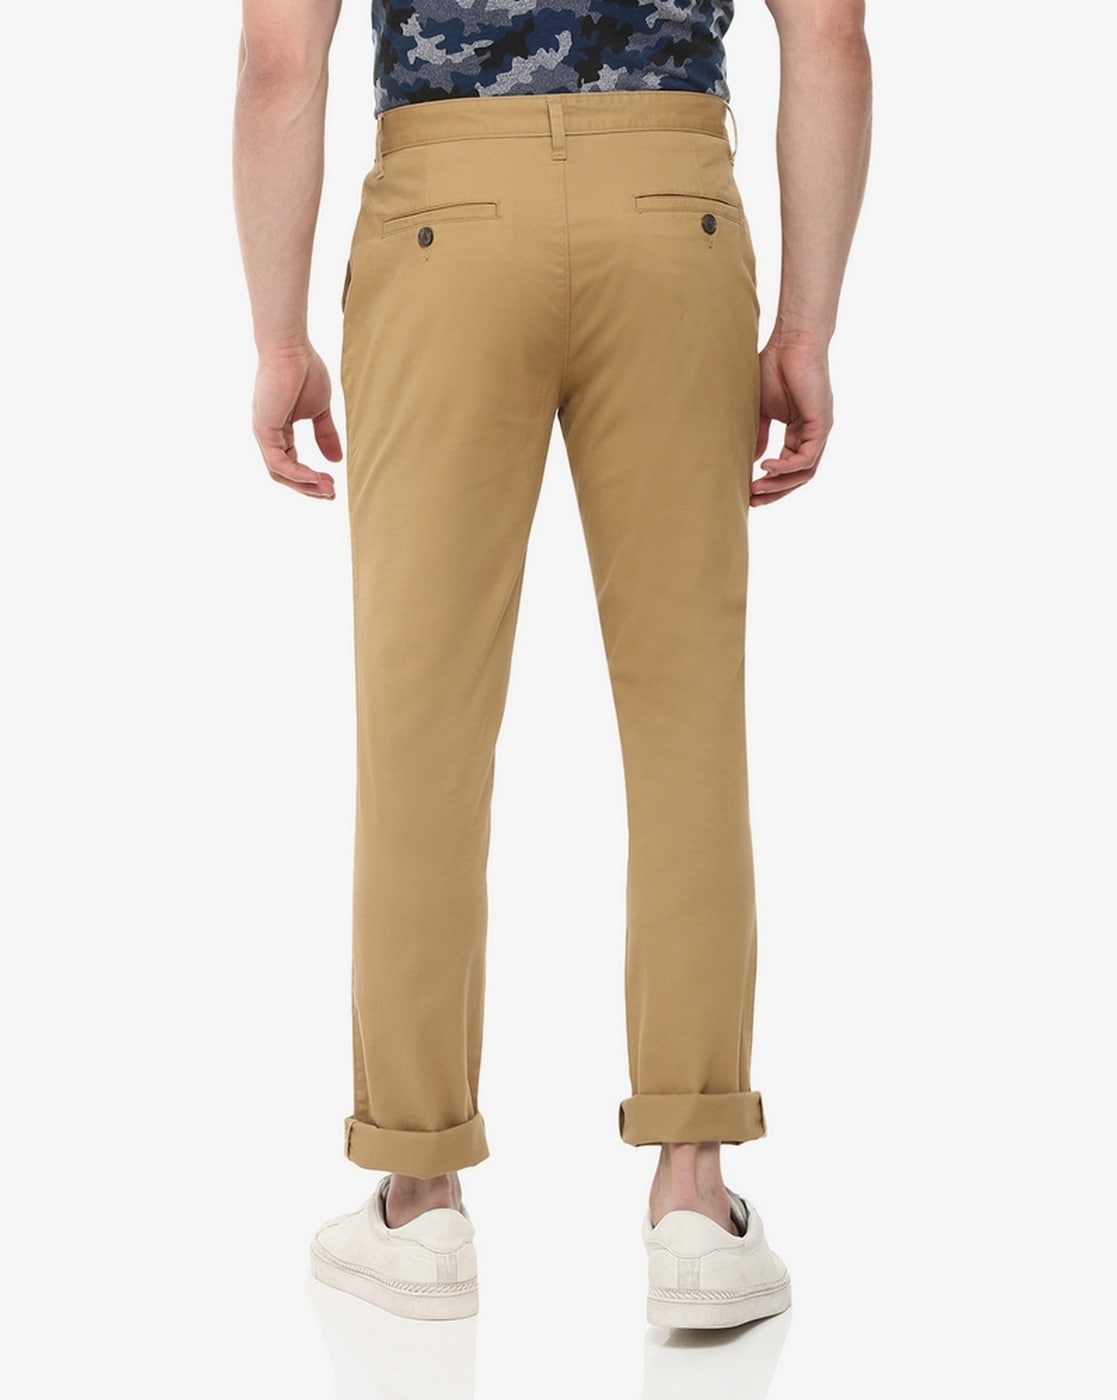 Blonde Camel Corduroy Trousers | Buy Online at Moss